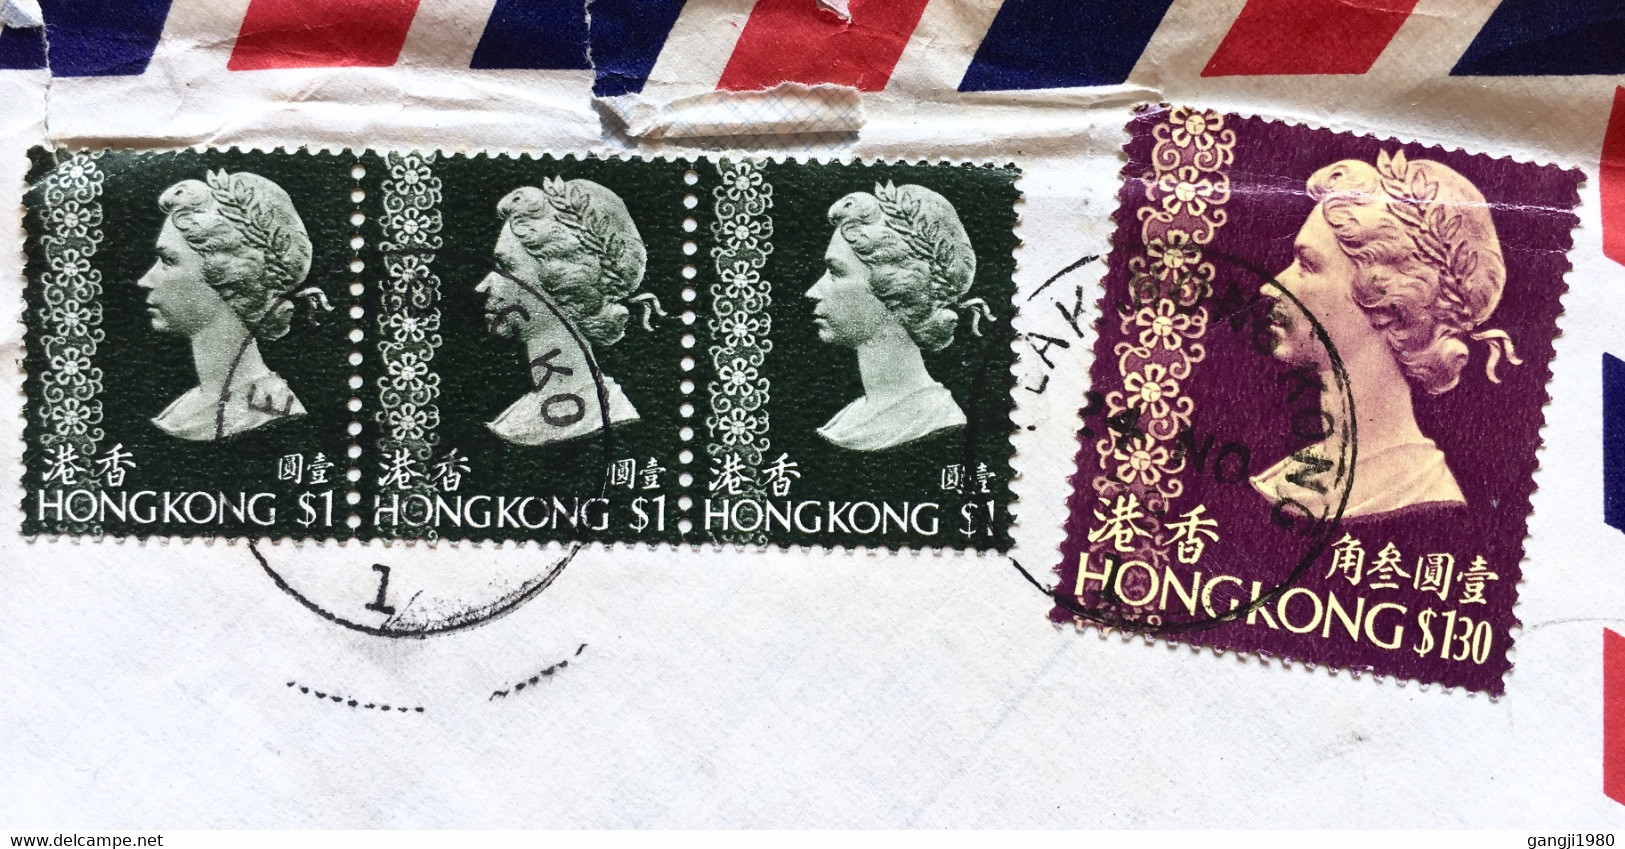 HONG KONG TO ENGLAND 1971, USED COVER, QUEEN 1$ 3 STAMPS, 1.30$ ONE STAMP, VIGNETTE EXPRESS LABEL, LAKE HONG KONG CANCEL - Lettres & Documents